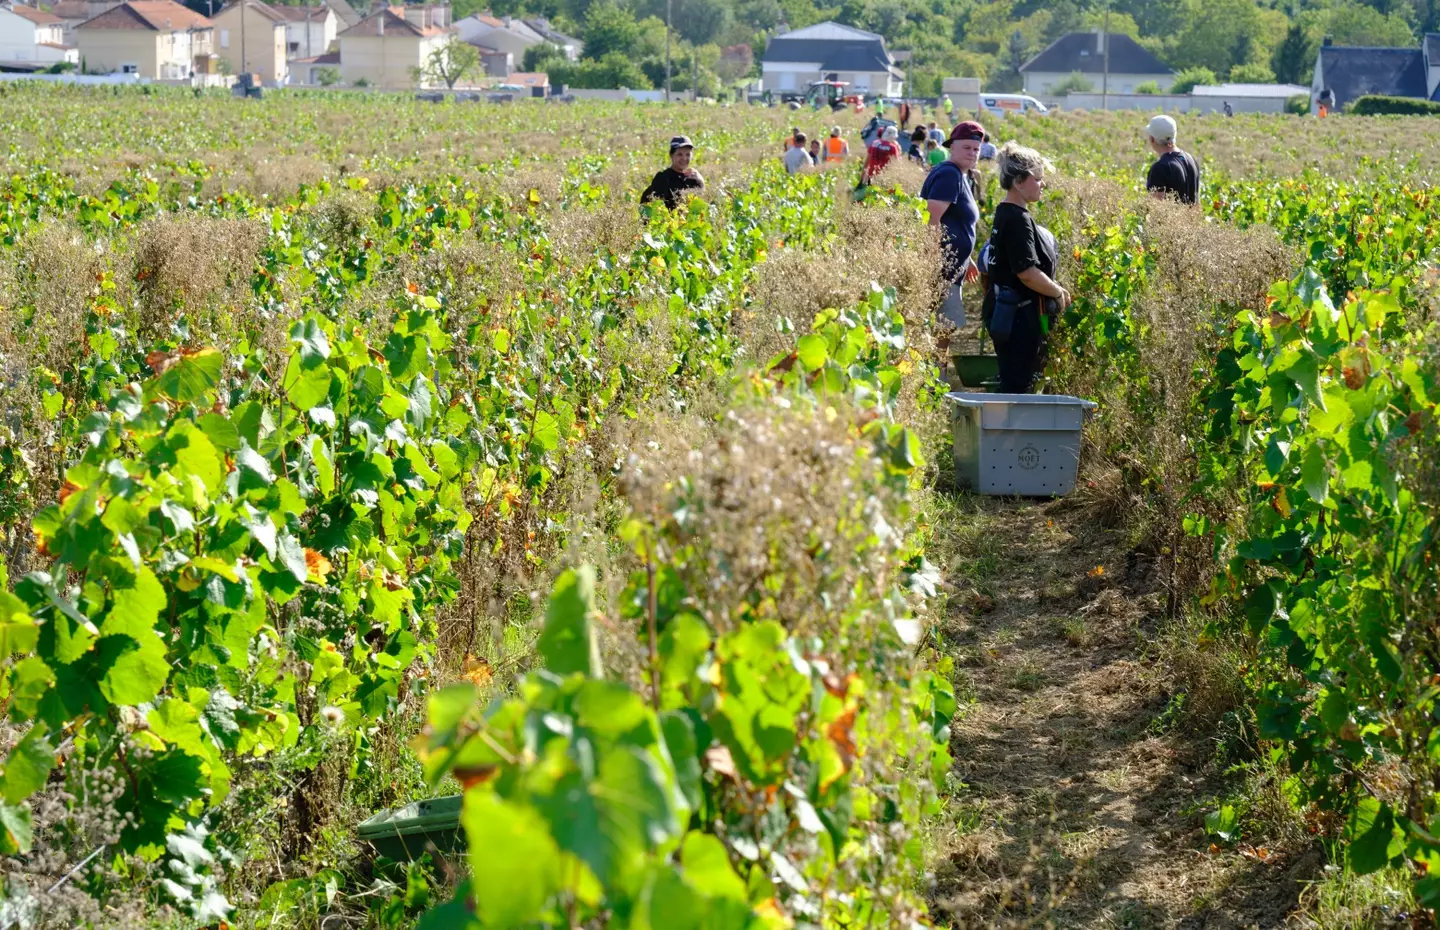 Adrian's vineyard on his estate is said to be inspired by those in the Champagne region of France (stock image) (Thierry Monasse/Getty Images)